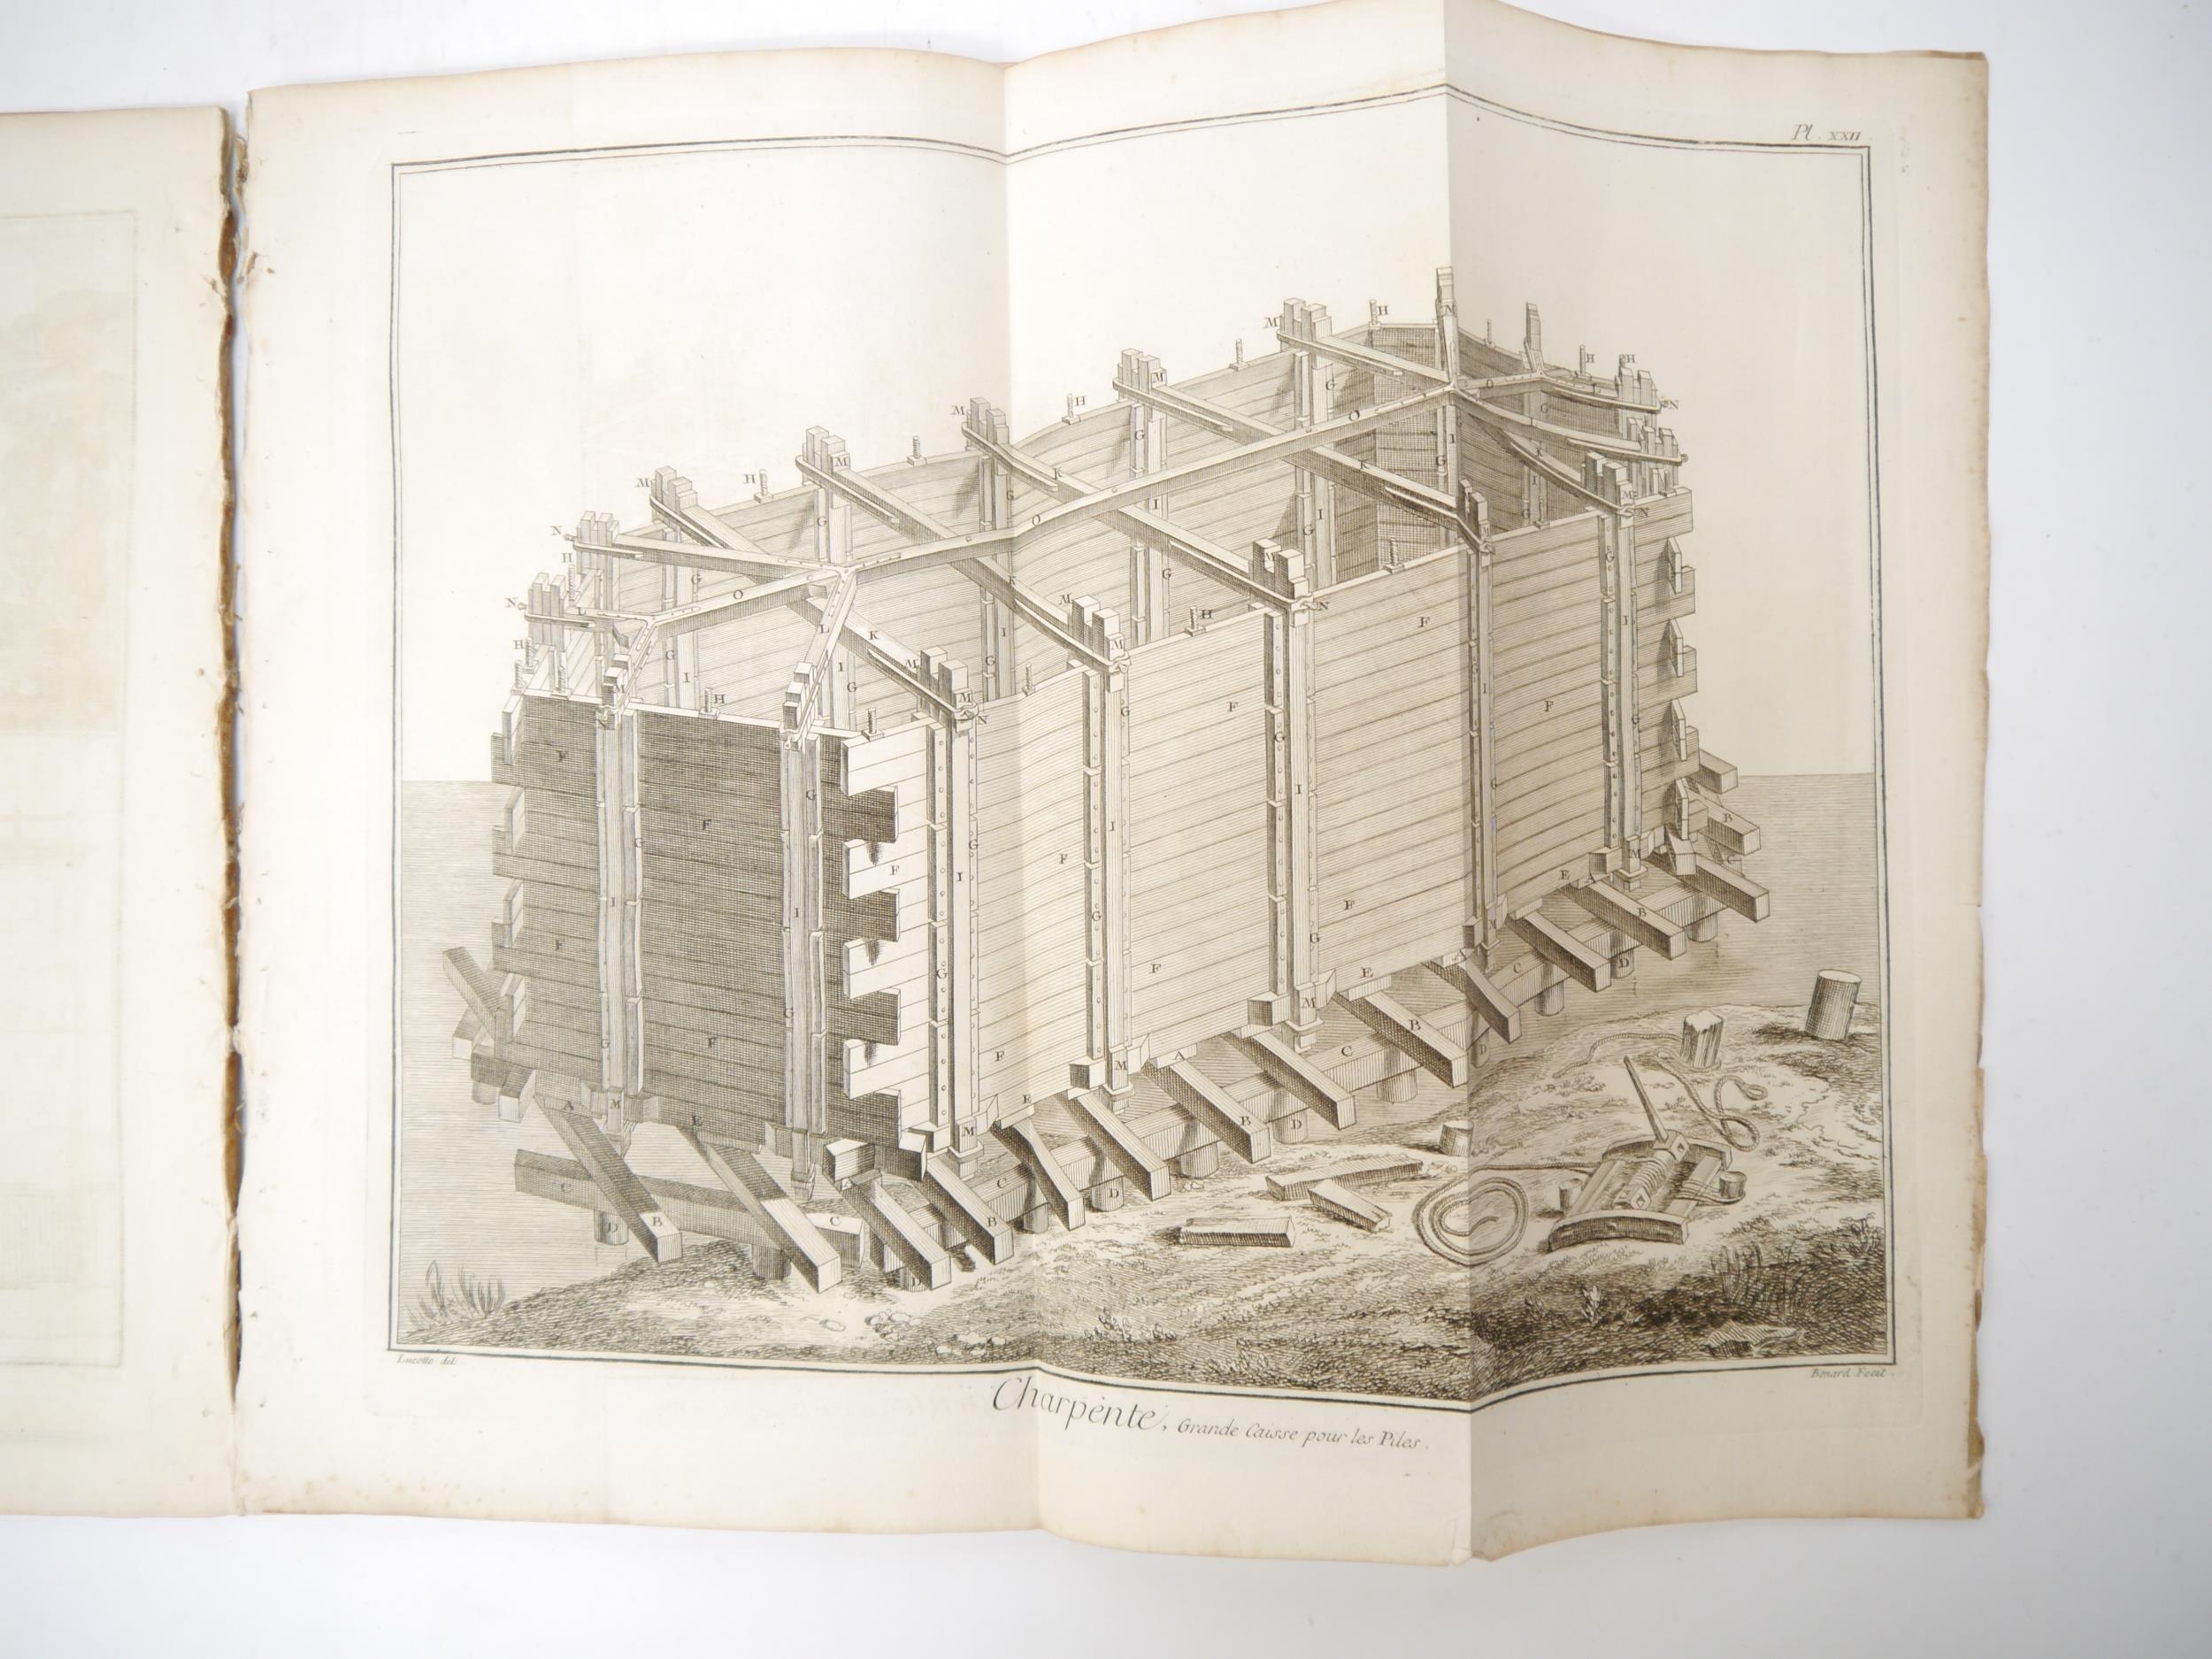 'Charpenterie' (Carpentry), a series of engraved plates from an 18th Century edition of Diderot's - Image 2 of 4